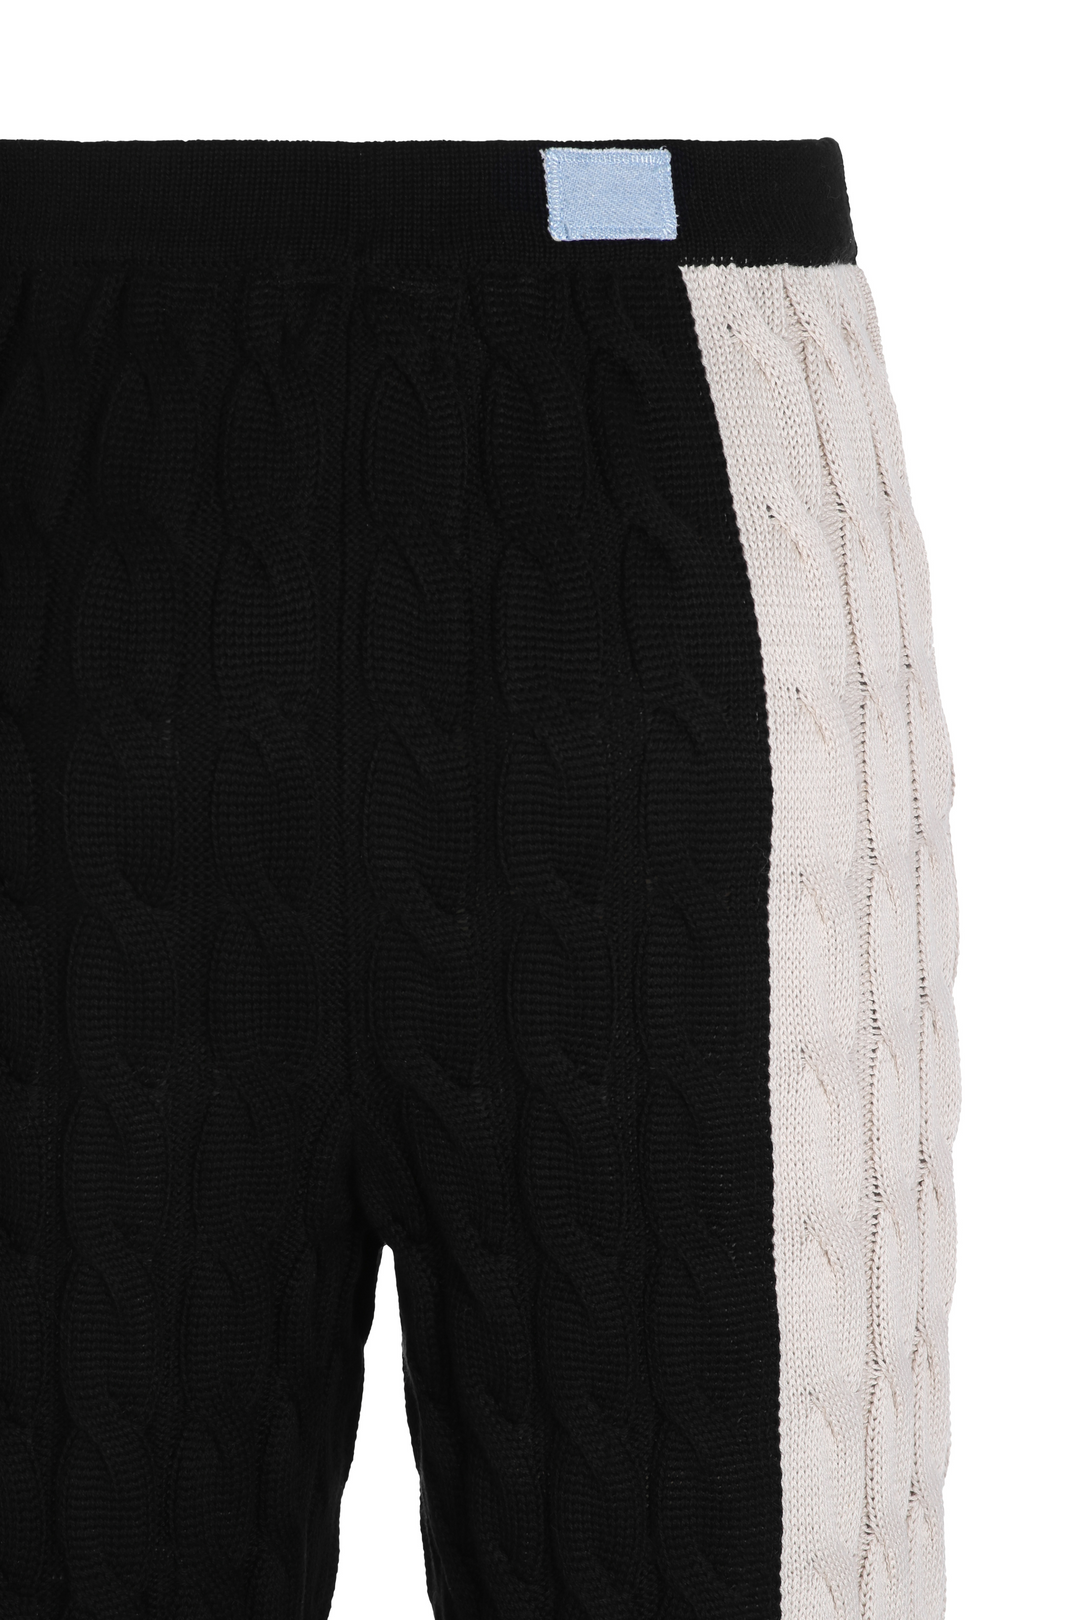 The Two-Toned Cable Knit Pants Reuben Oliver